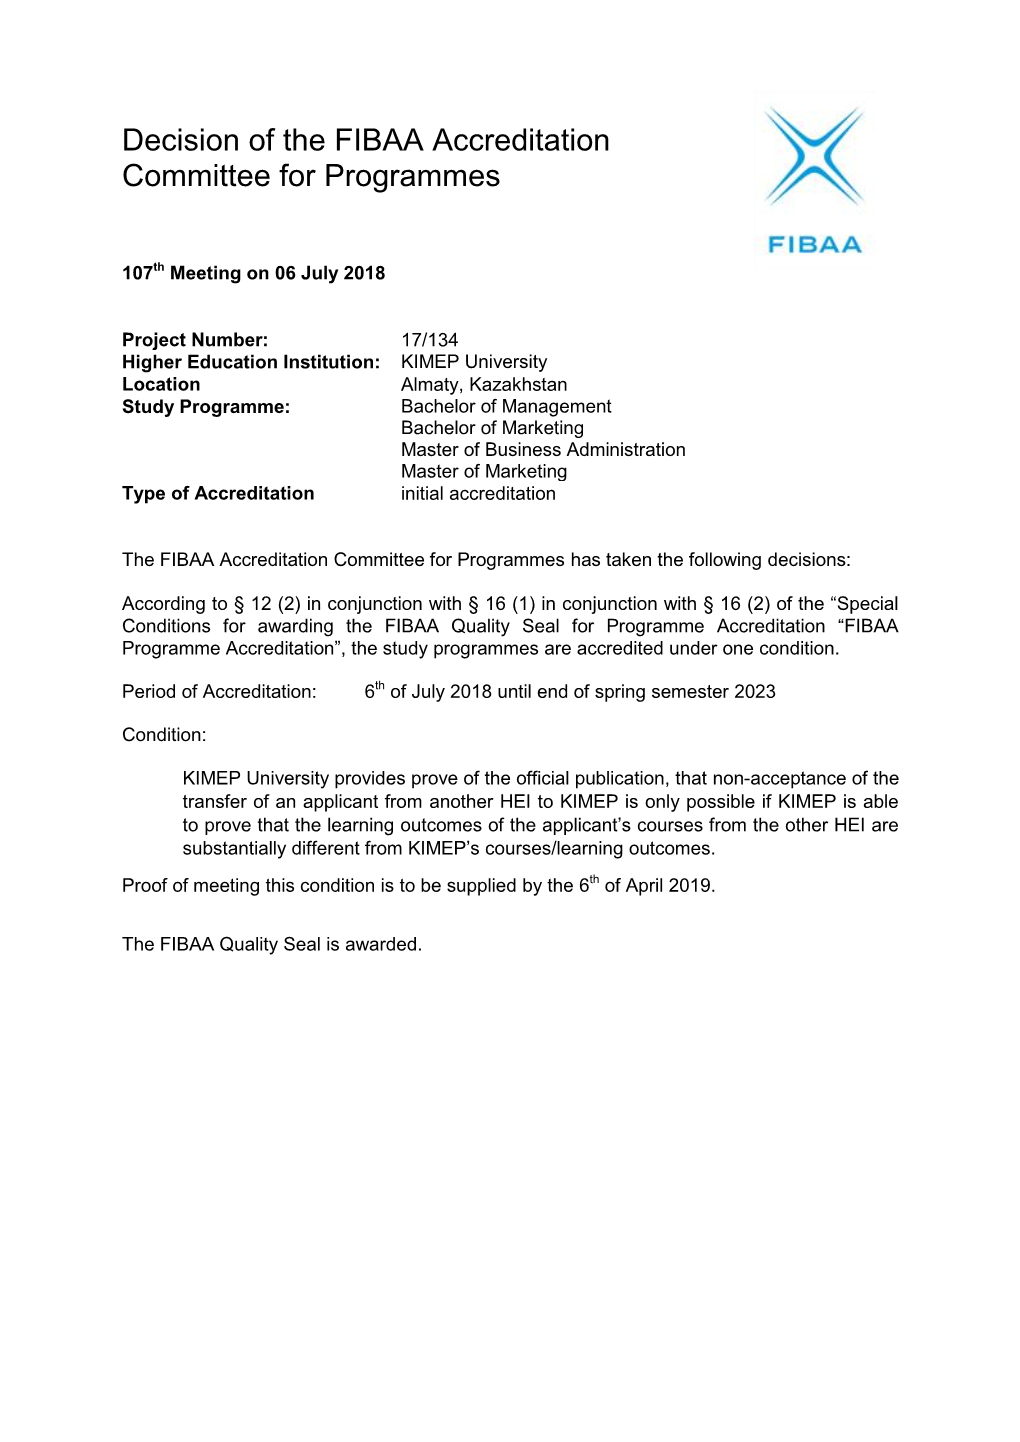 Decision of the FIBAA Accreditation Committee for Programmes